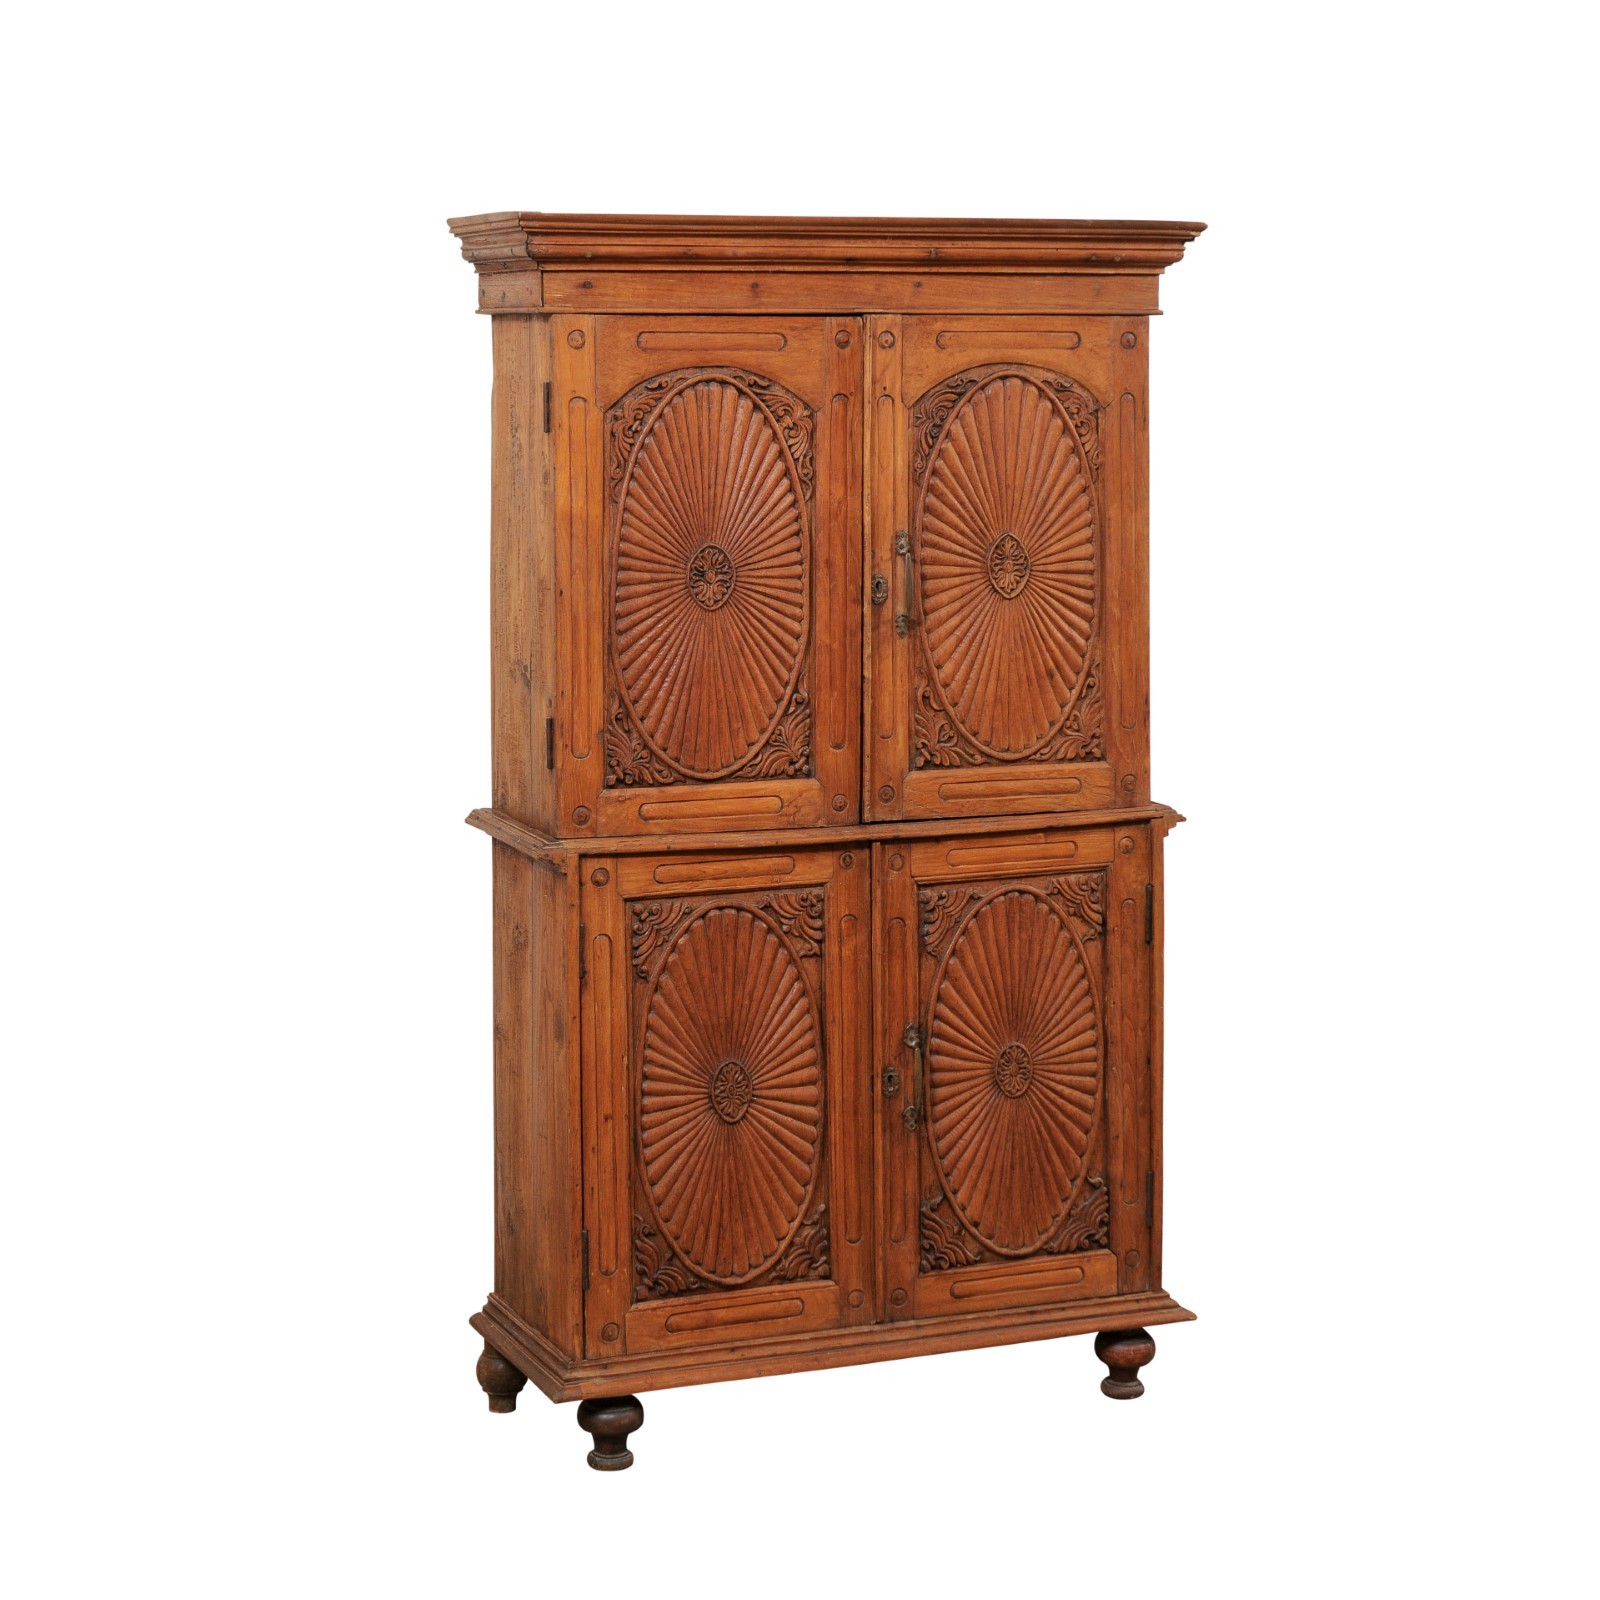 19th c British Colonial Carved Teak Cabinet